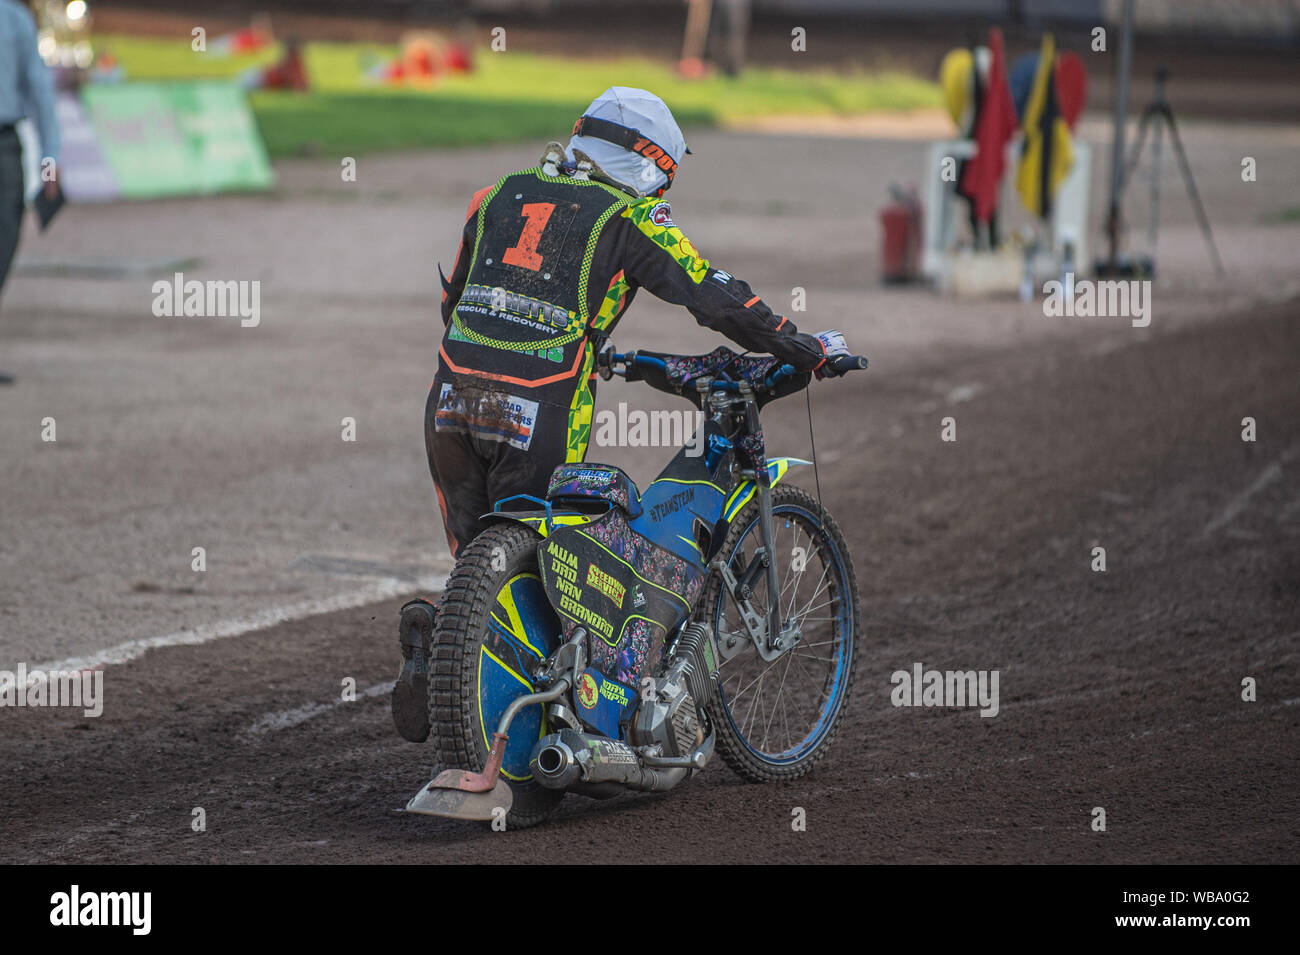 Sheffield, UK. 25th Aug, 2019. SHEFFIELD, ENGLAND AUG 25TH Ryan Kinsley pushes home to gain third place after falling on the last turn. He got up and pushed his bike to the finish during the National League Best pairs Championship at Owlerton Stadium, Sheffield on Sunday 25th August 2019 (Credit: Ian Charles | MI News) Credit: MI News & Sport /Alamy Live News Stock Photo